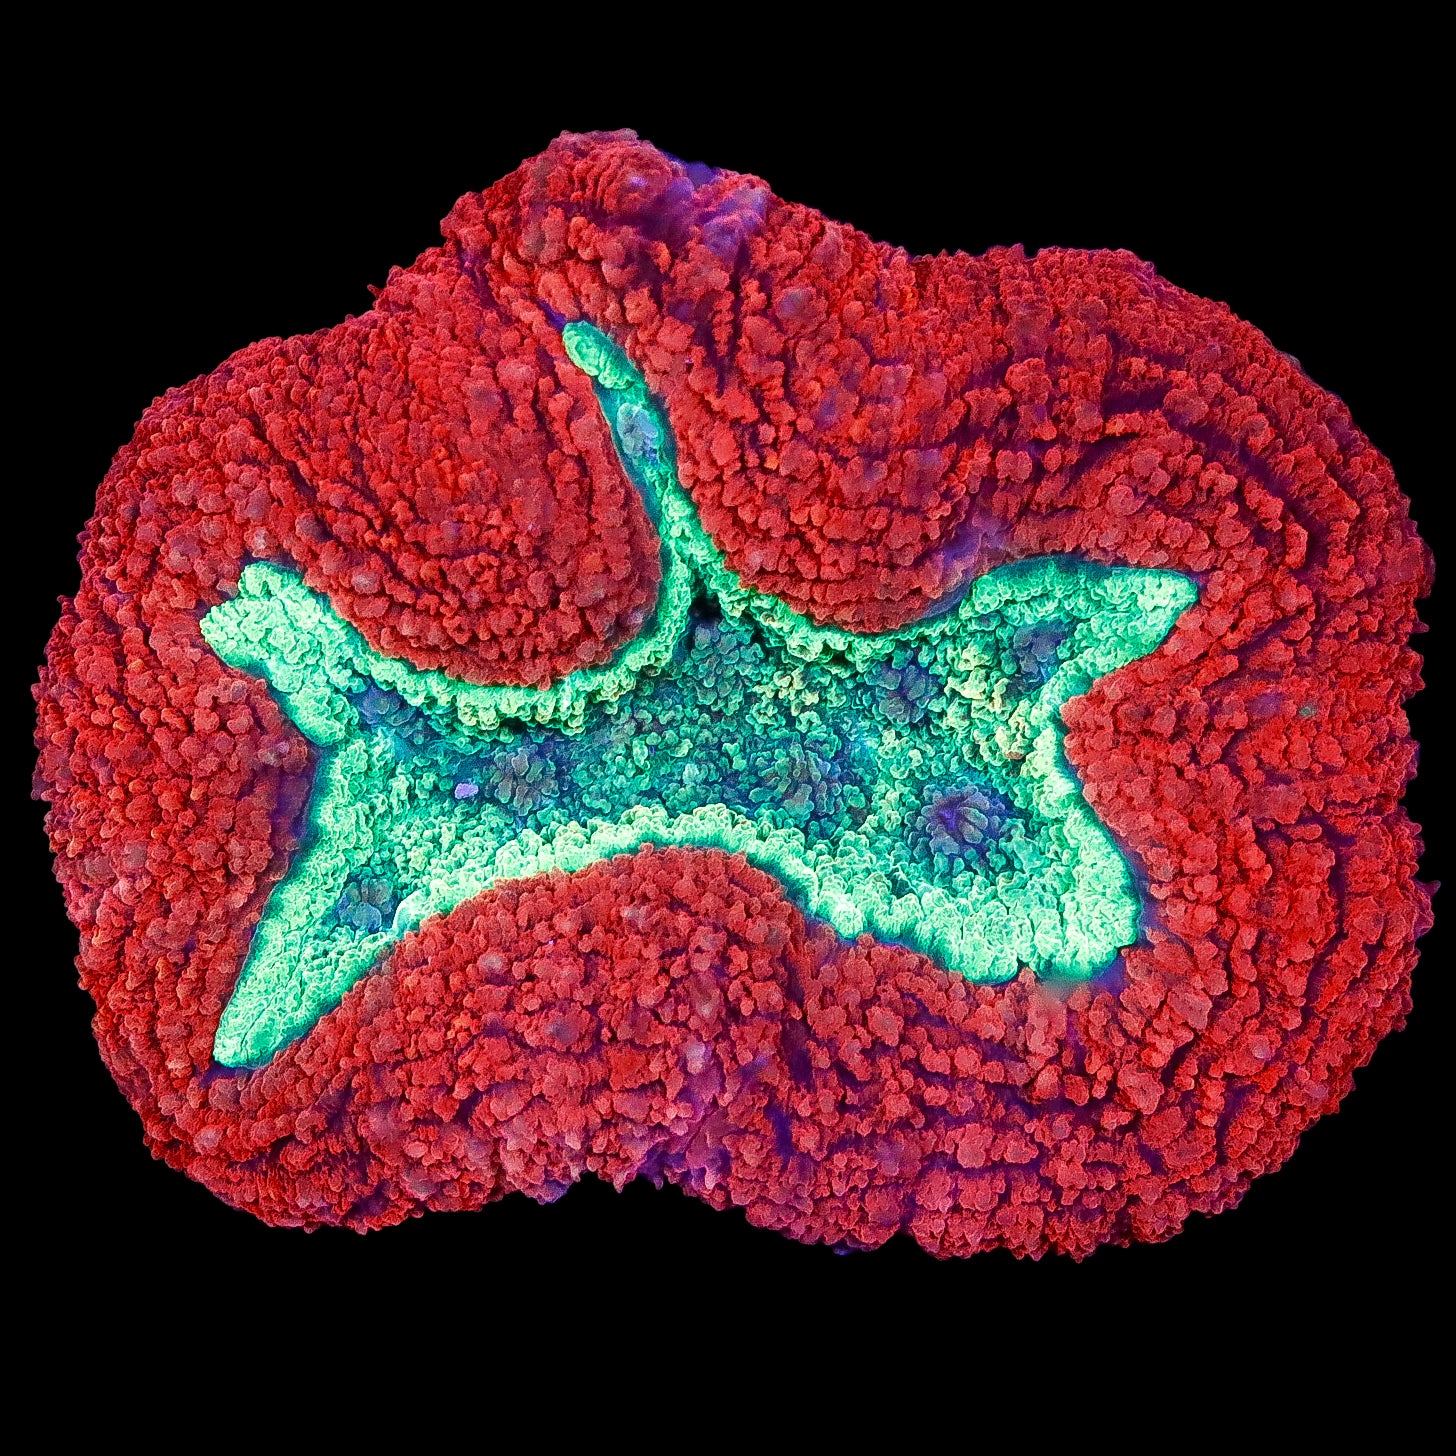 Red & Green Symphyllia Coral Colony